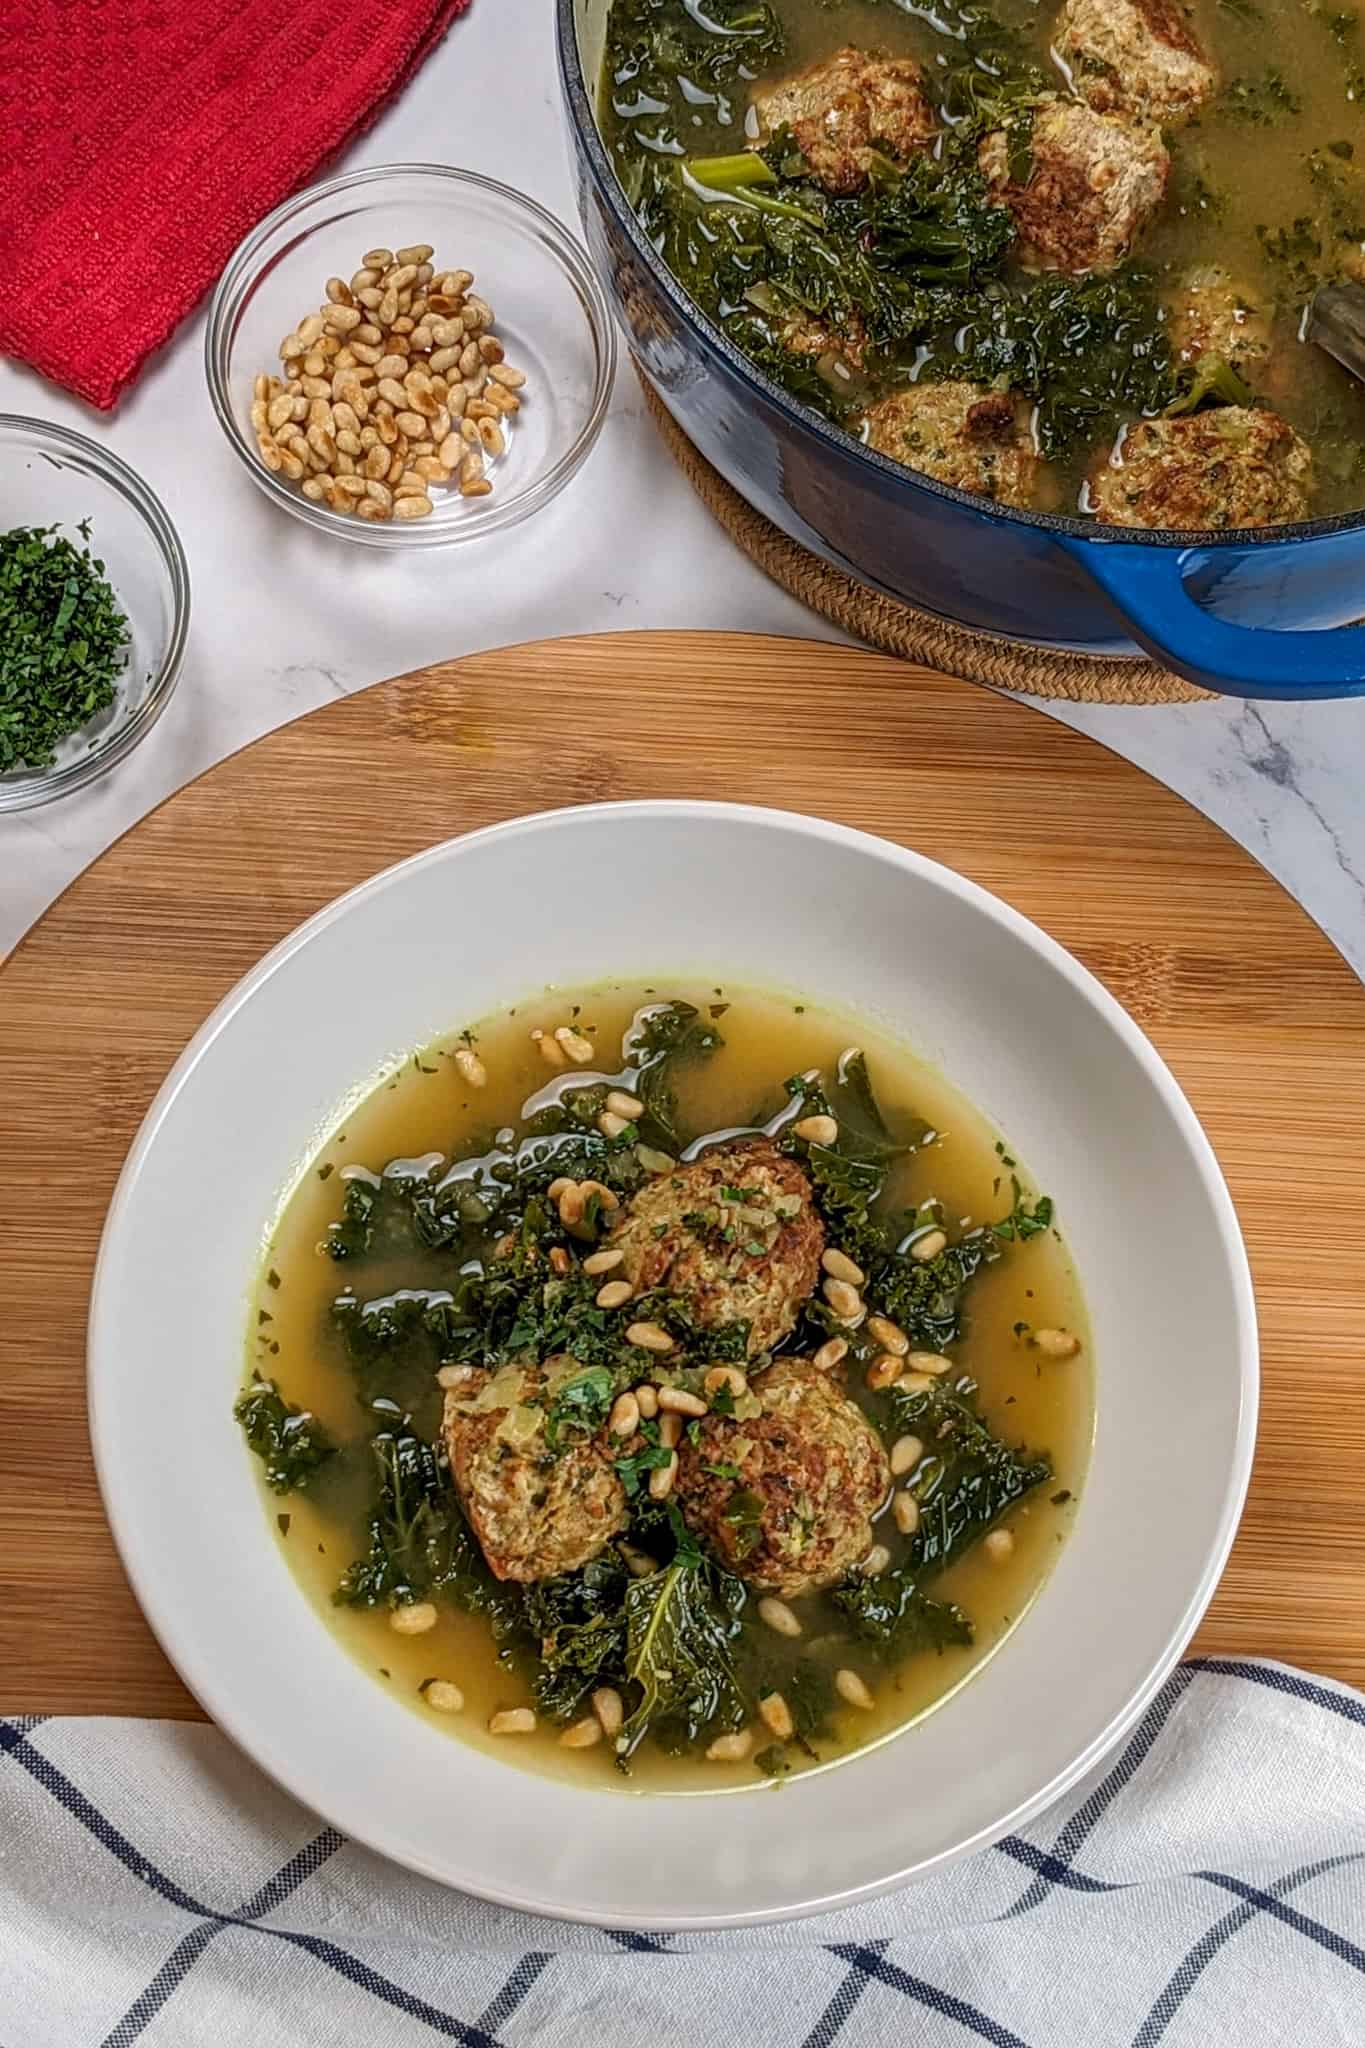 top close up view of the Easy and Healthy Spicy Turkey Meatball Kale Soup in a wide rim bowl garnished with toasted pine nuts surrounded by a container of pine nuts and chopped parsley separately in small glass bowls next to a dtuch oven of soup